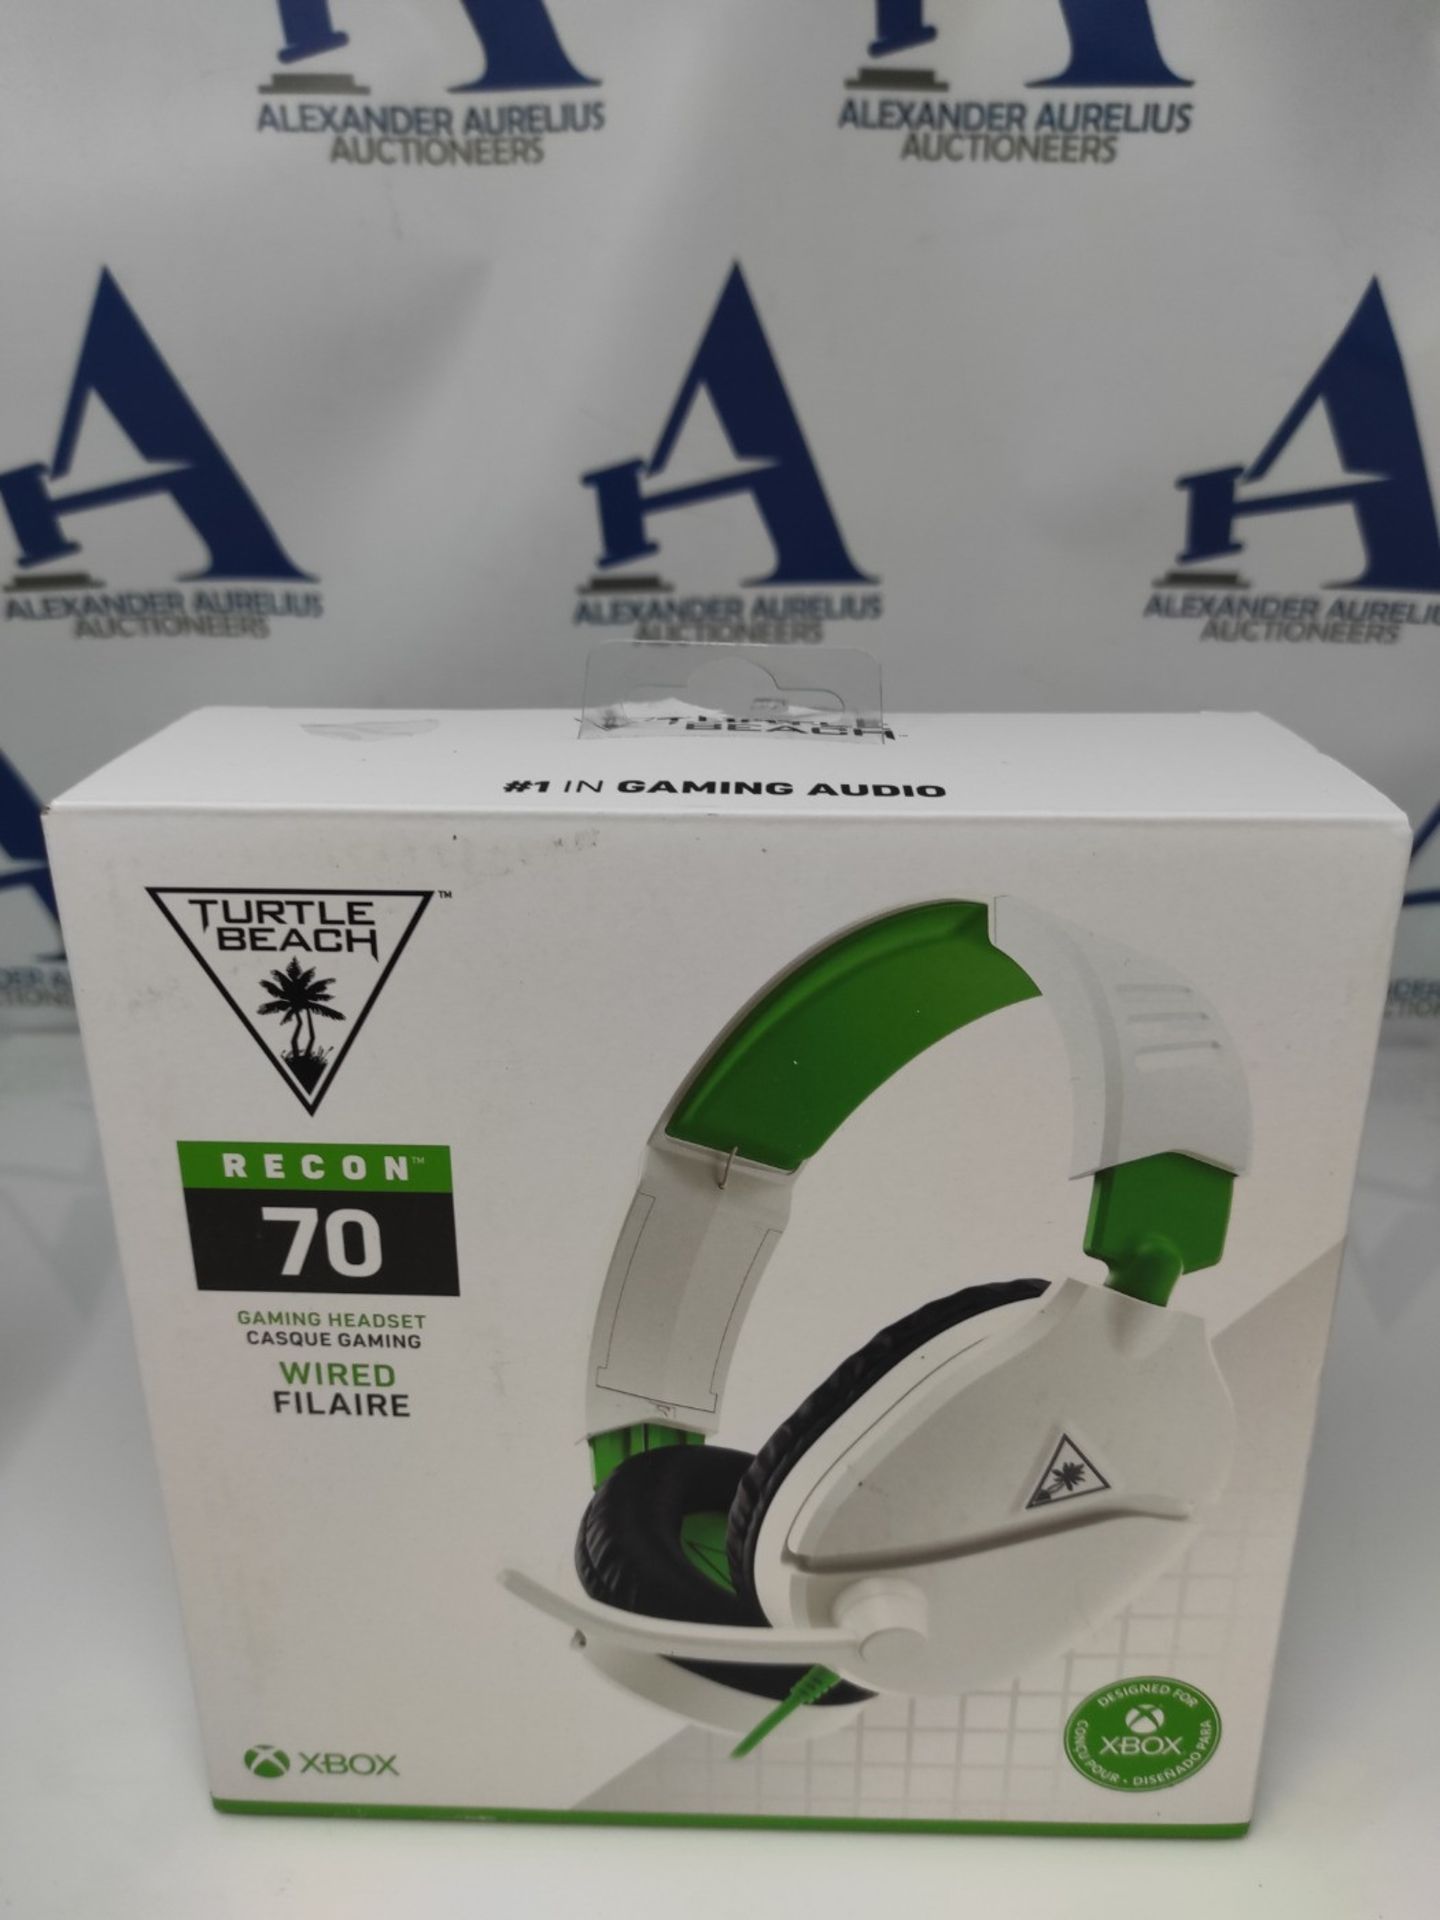 Turtle Beach Recon 70X White Gaming Headset - Xbox Series S/X, Xbox One, PS5, PS4, Nin - Image 2 of 3